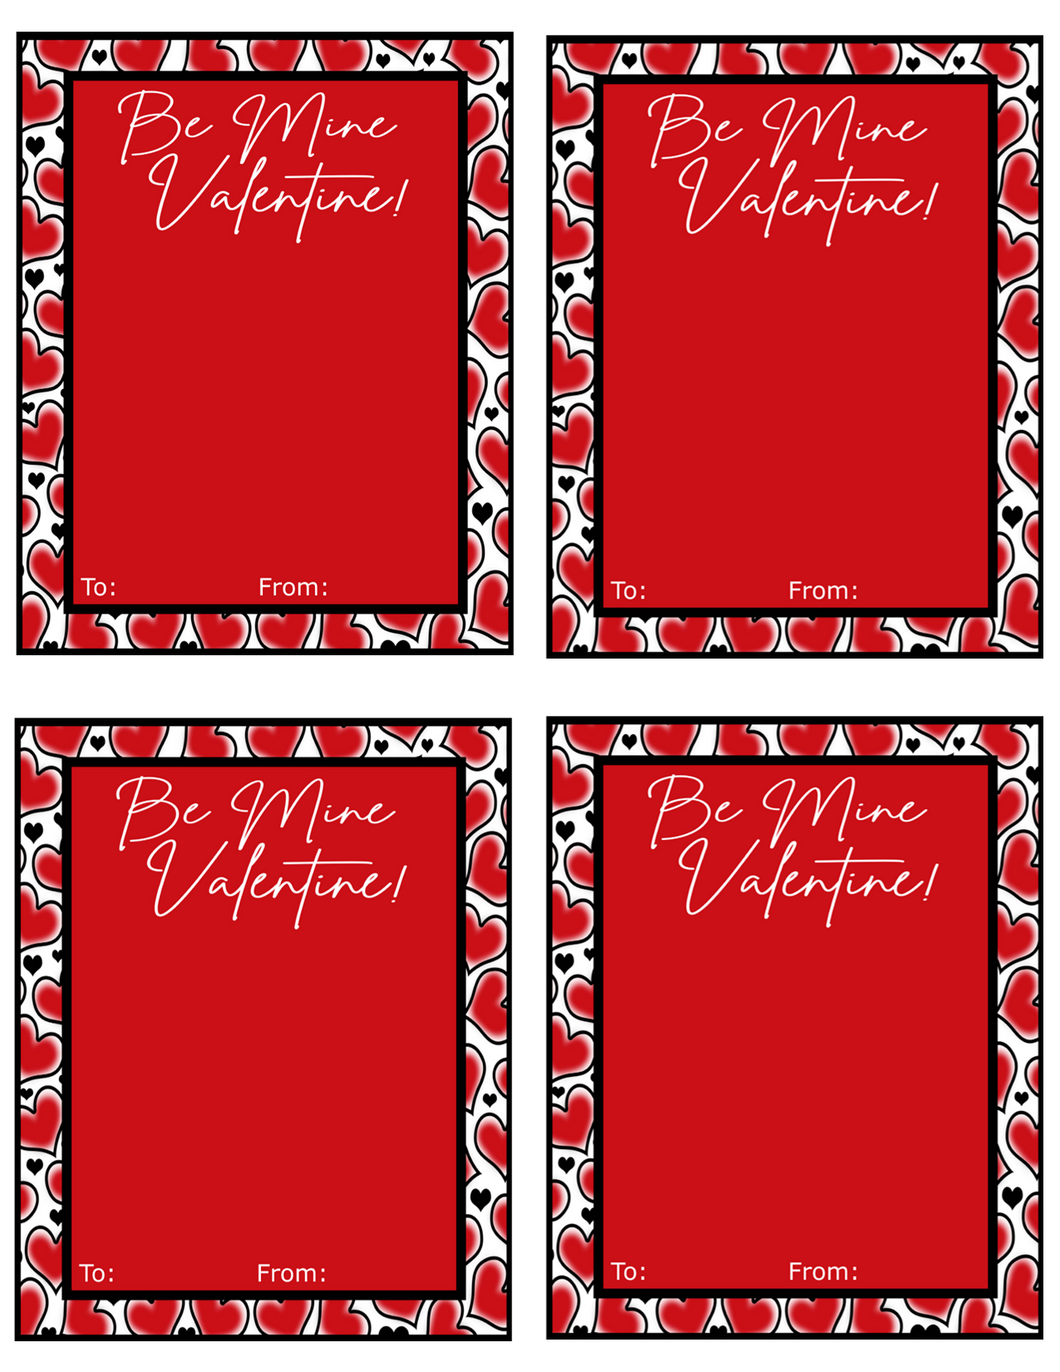 Be Mine Valentine Card w/TF 4x5 - Dots and Bows Designs